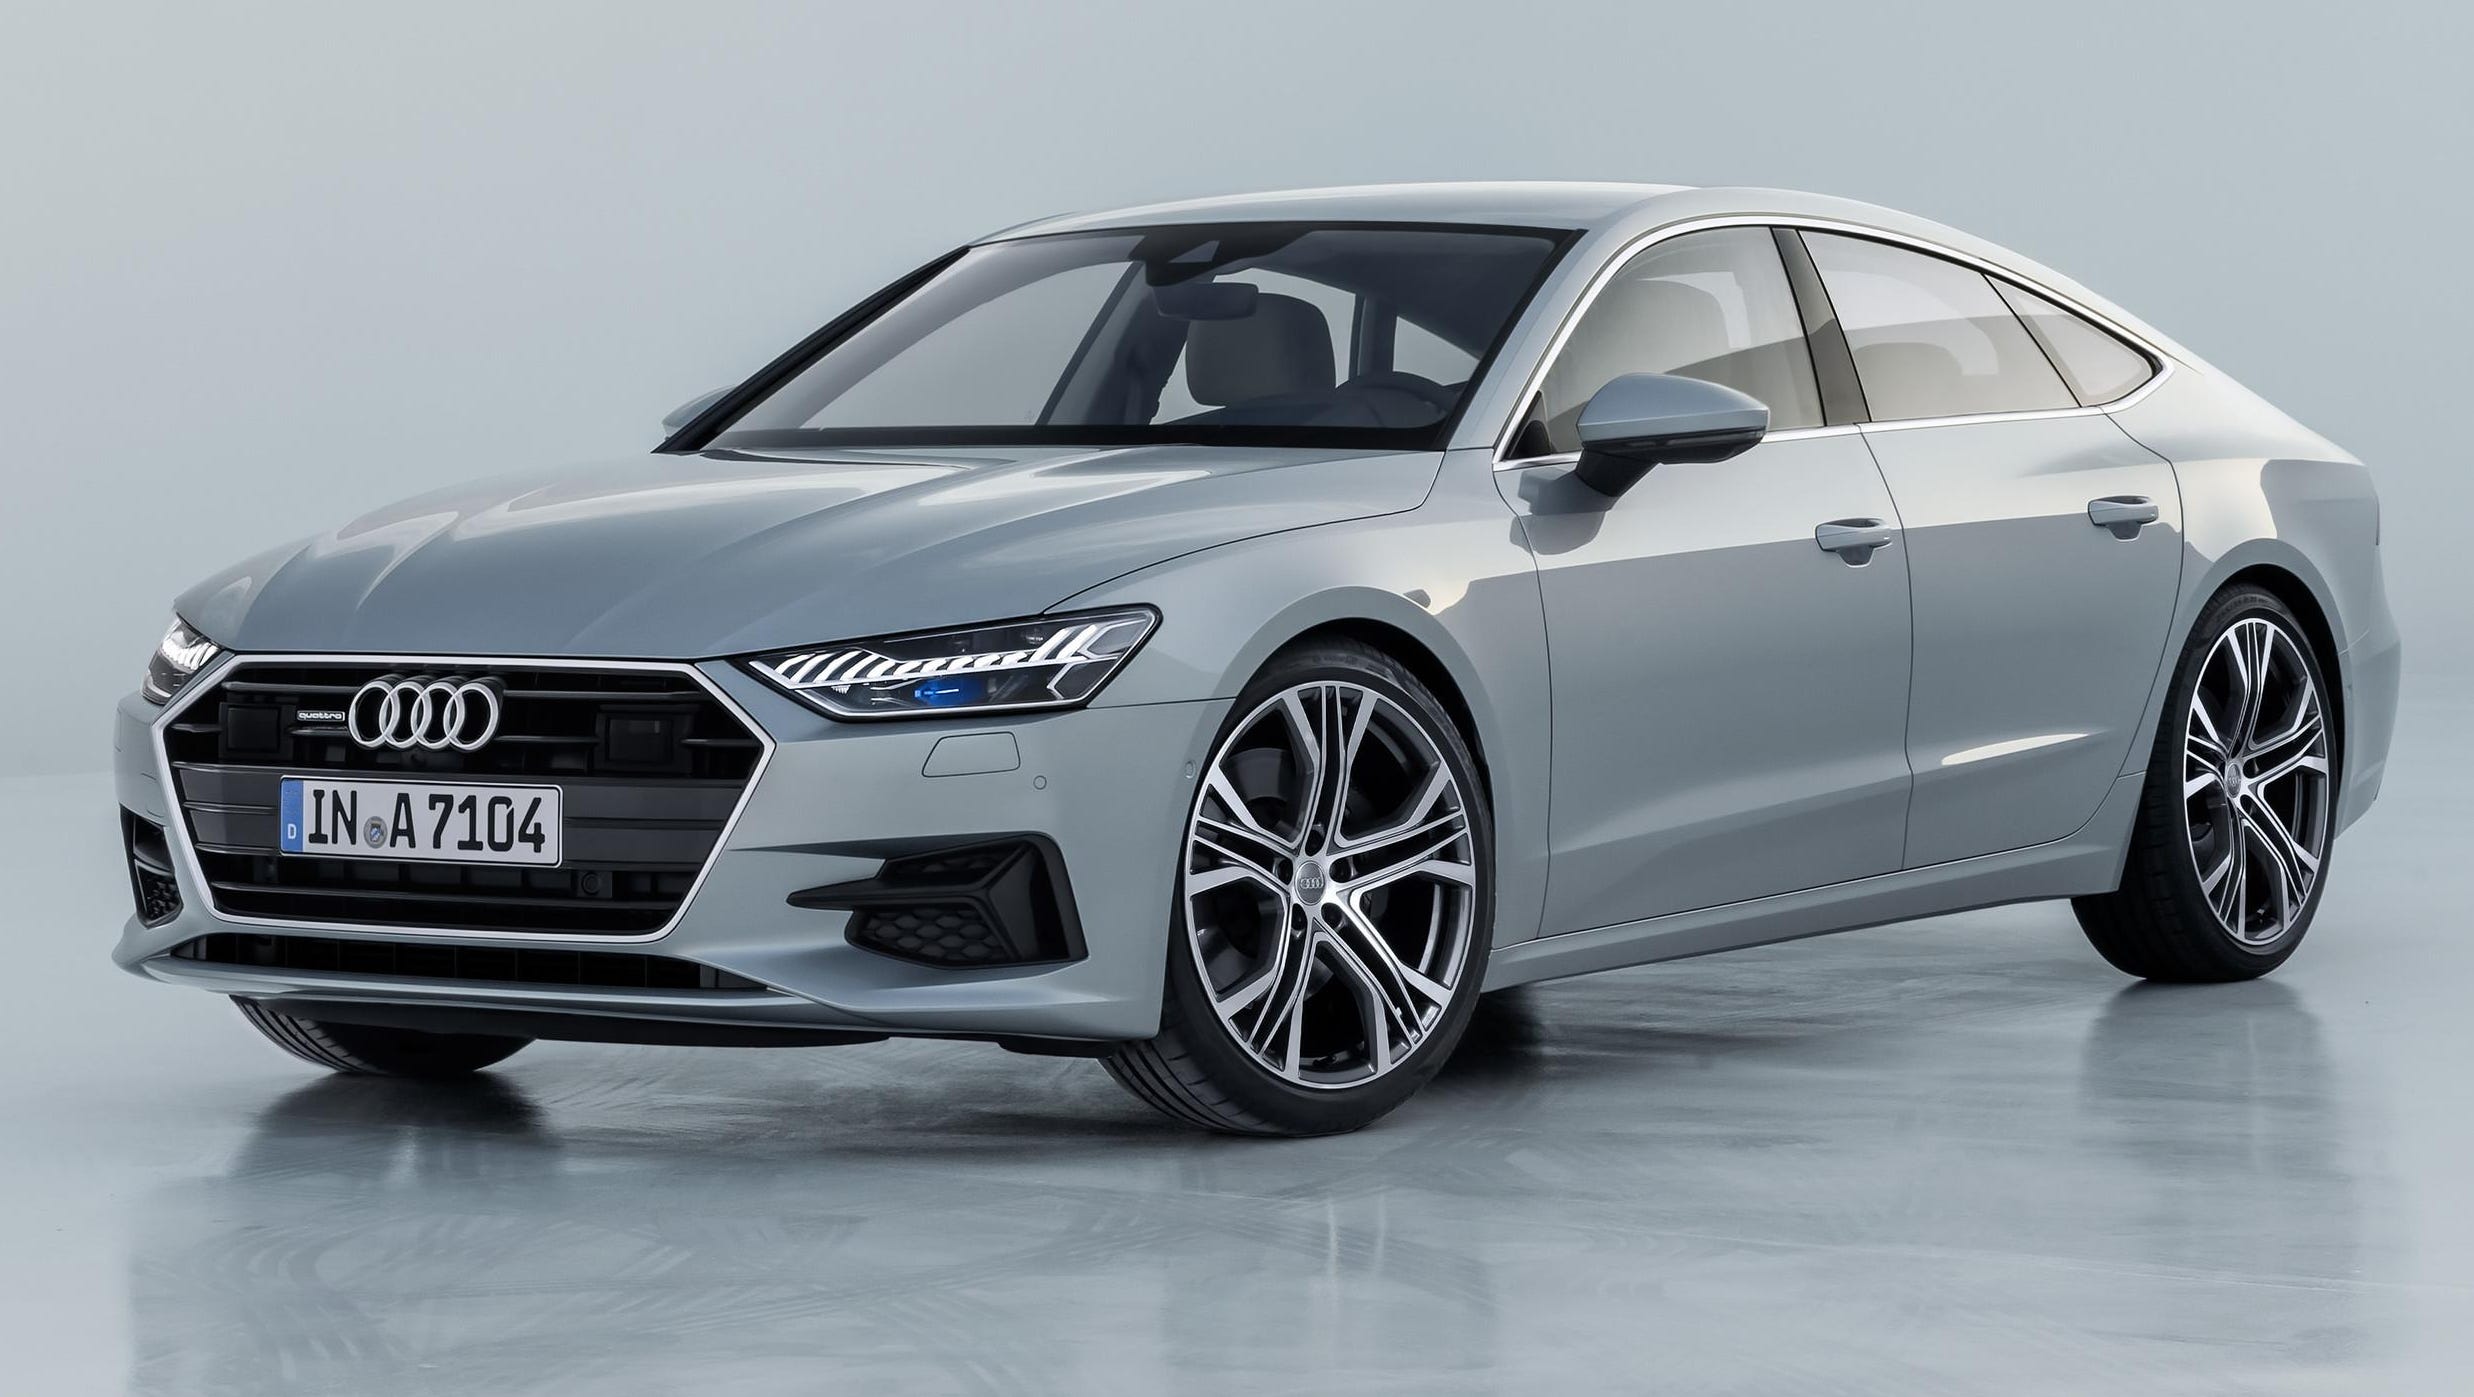 Audi is recalling certain A6, A7, shown, and Q7 SUVs from the 2016 through 2018 model years. Also included are A8 sedans from 2015 through 2018.